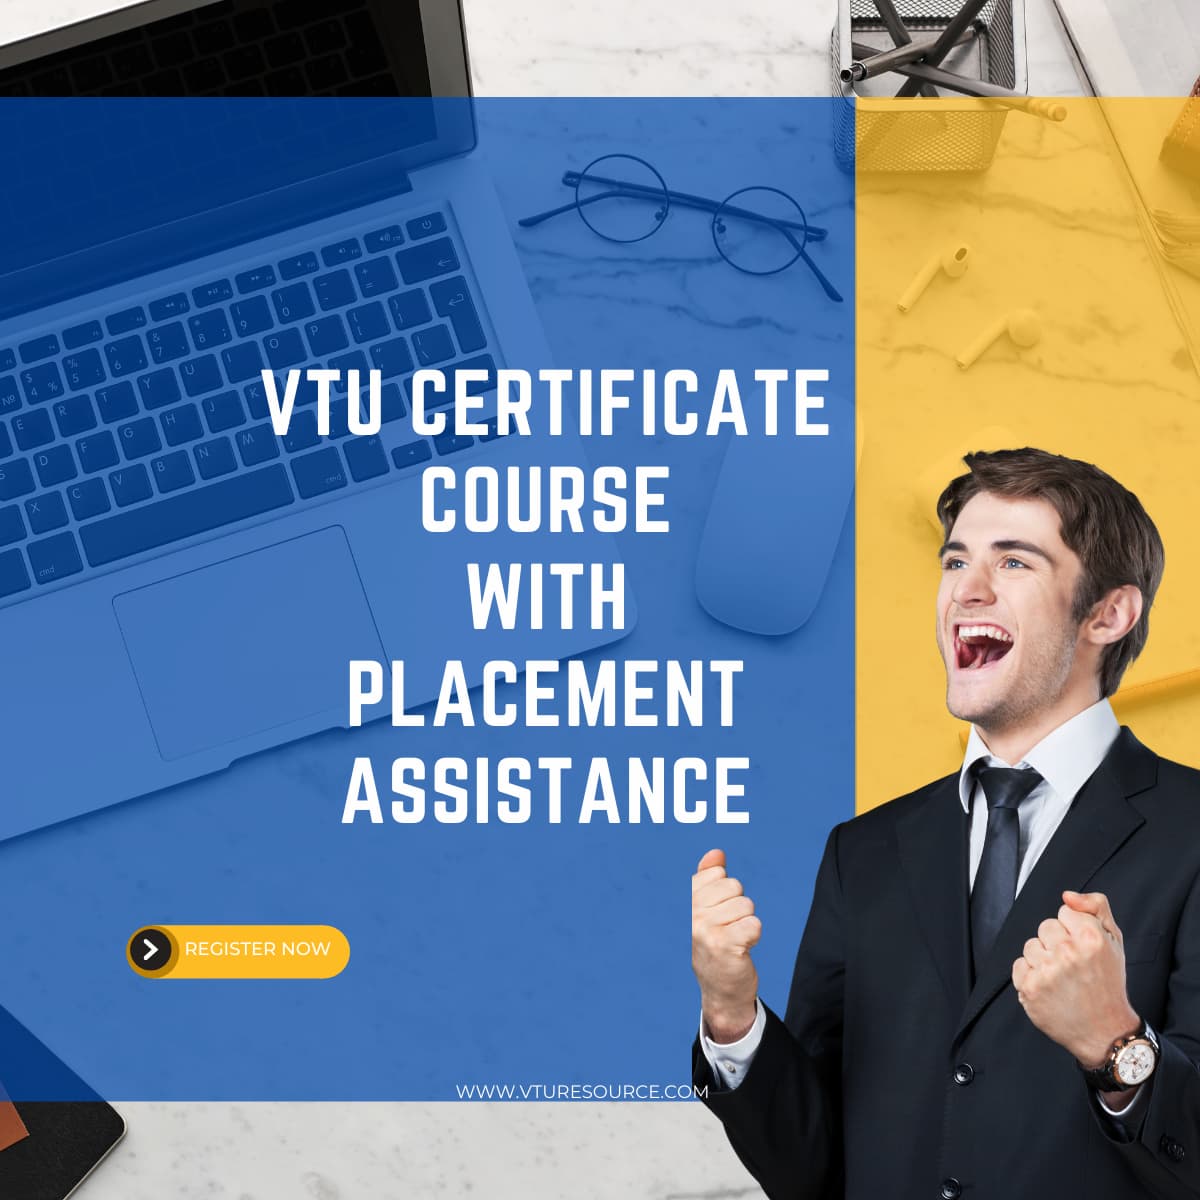 VTU Certificate Course with Placement Assistance